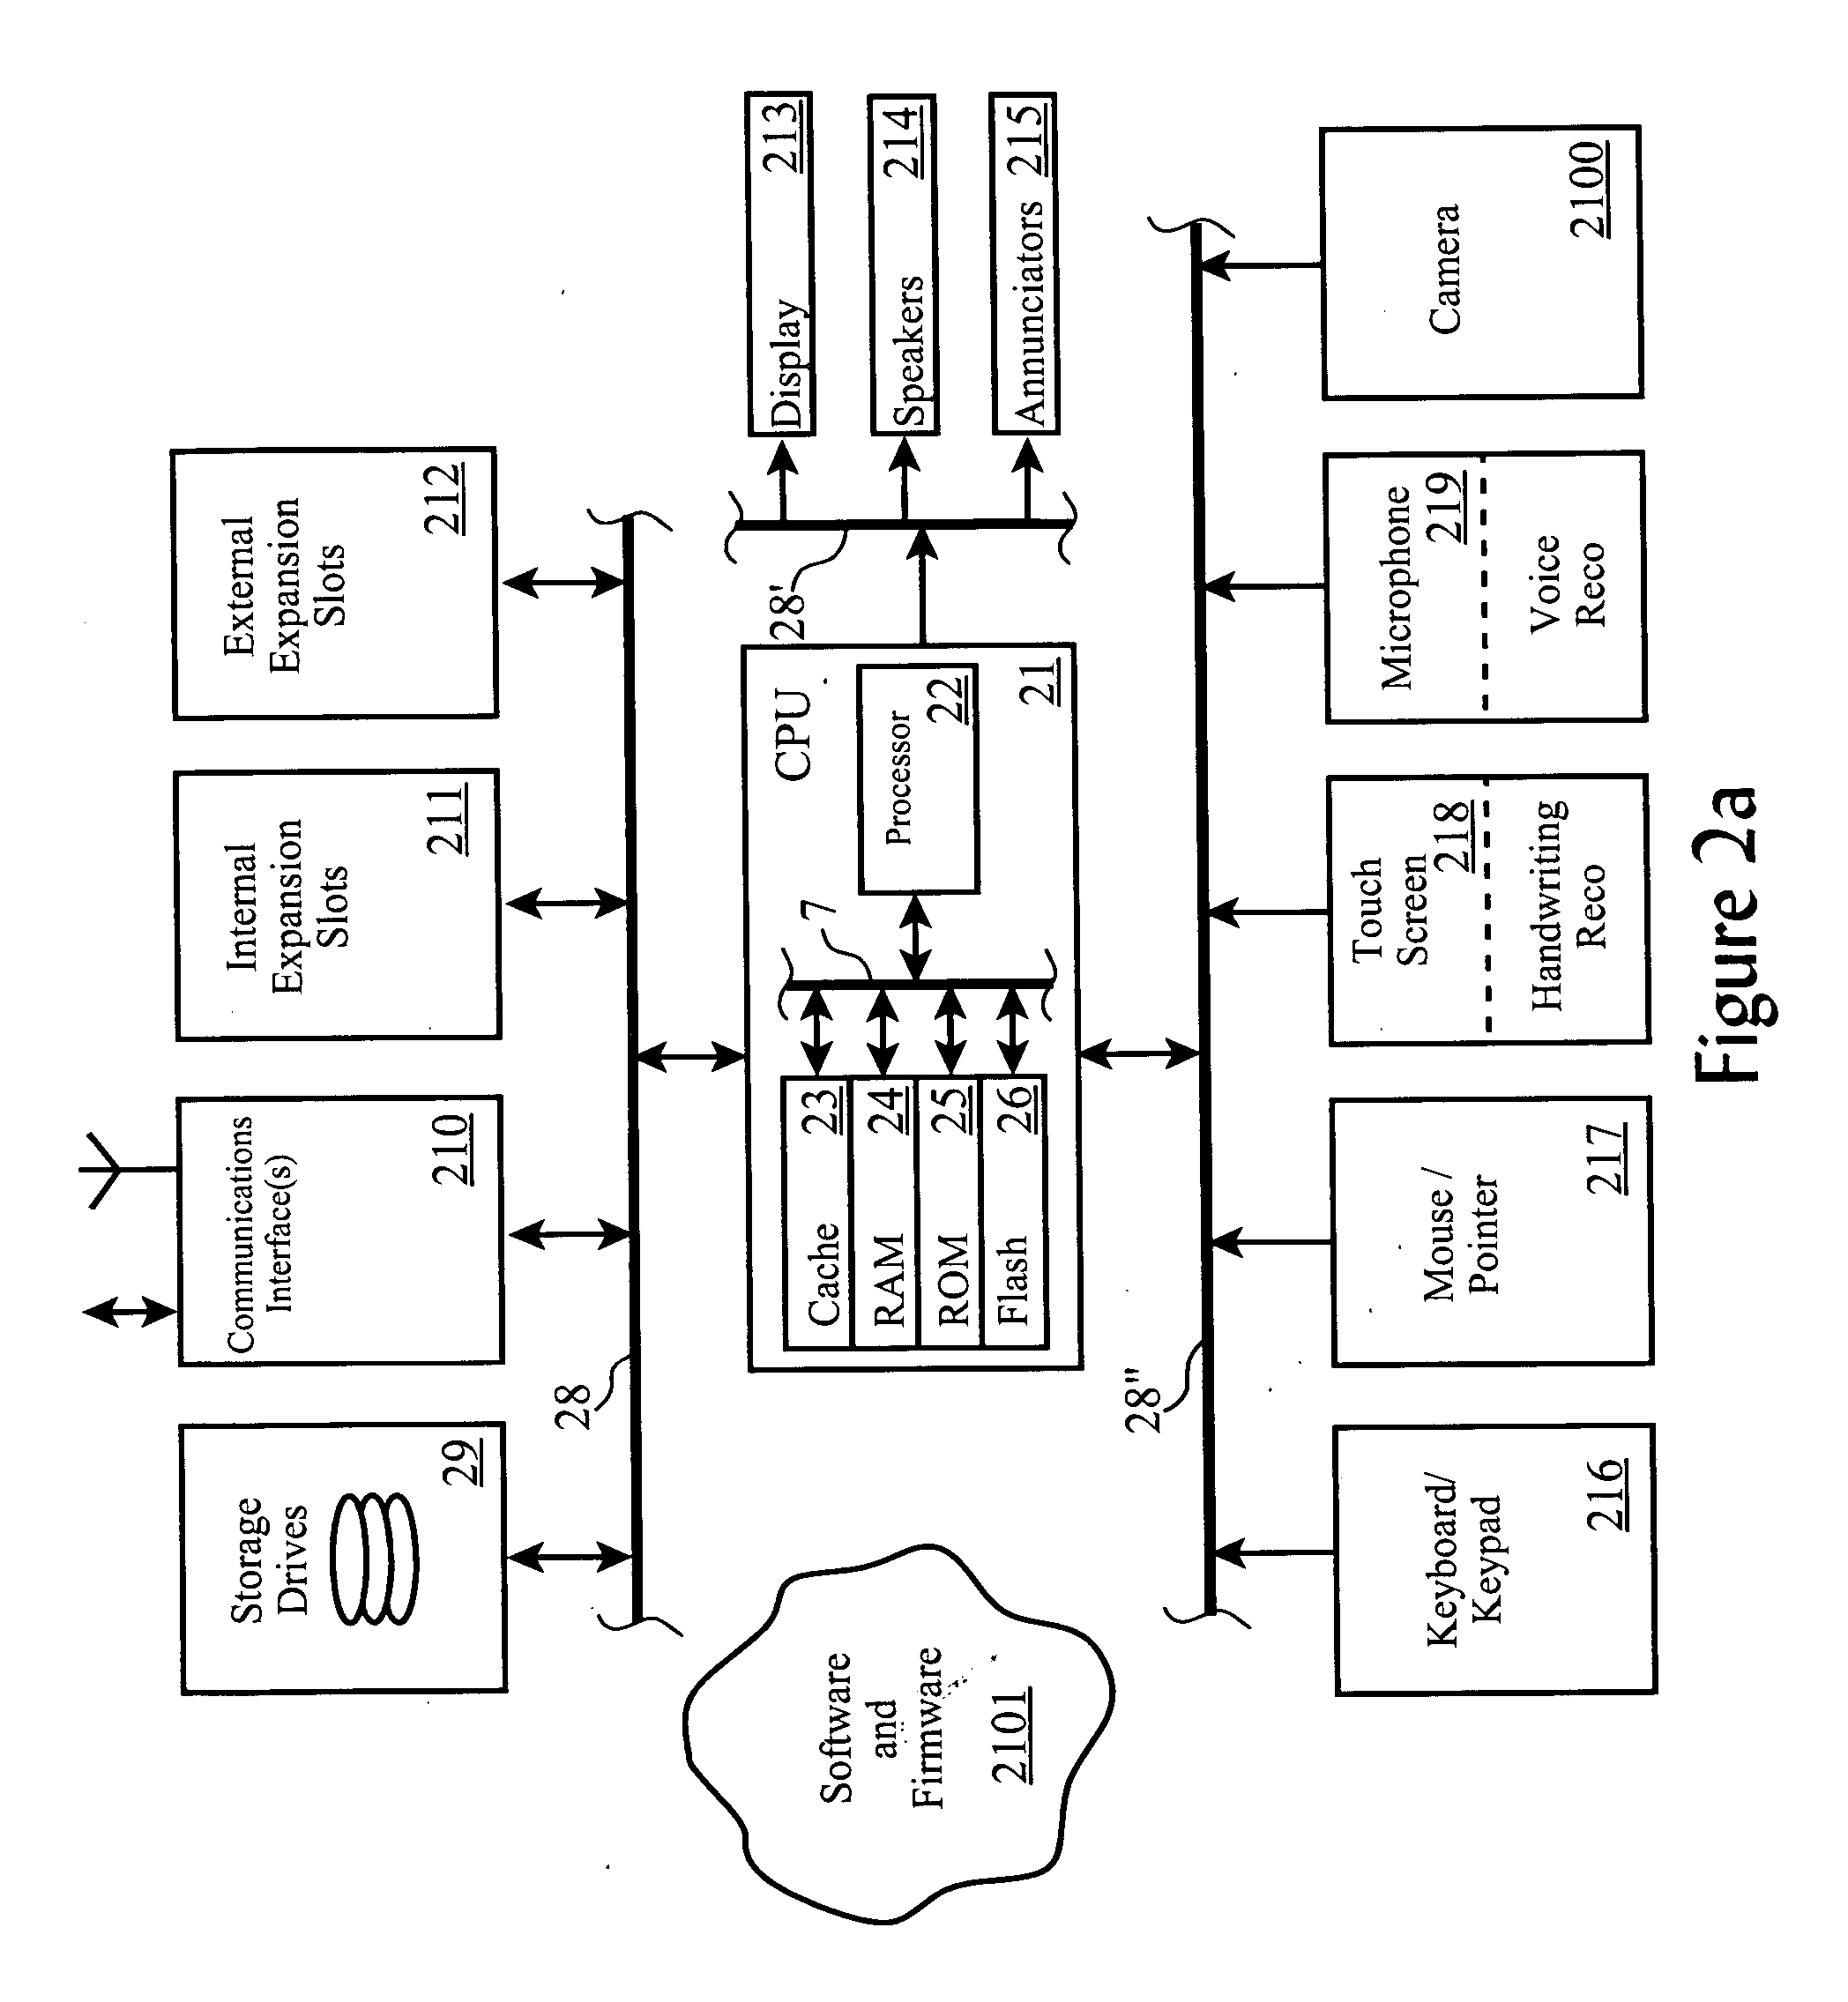 System and method for outcomes-based delivery of services